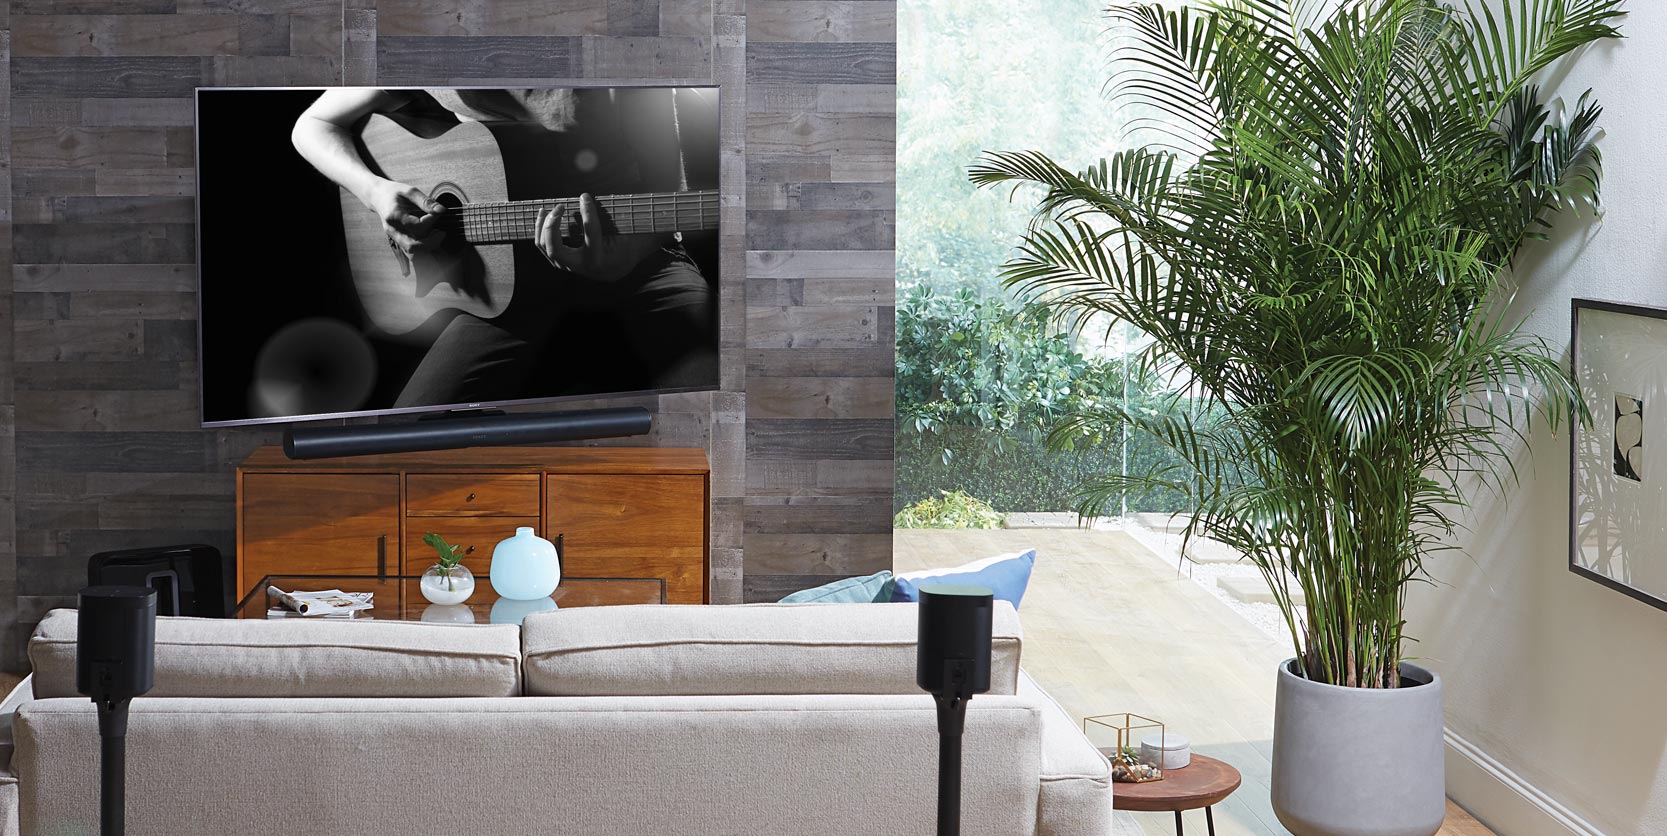 Extendable Soundbar Wall Mount shown used in living room setting.